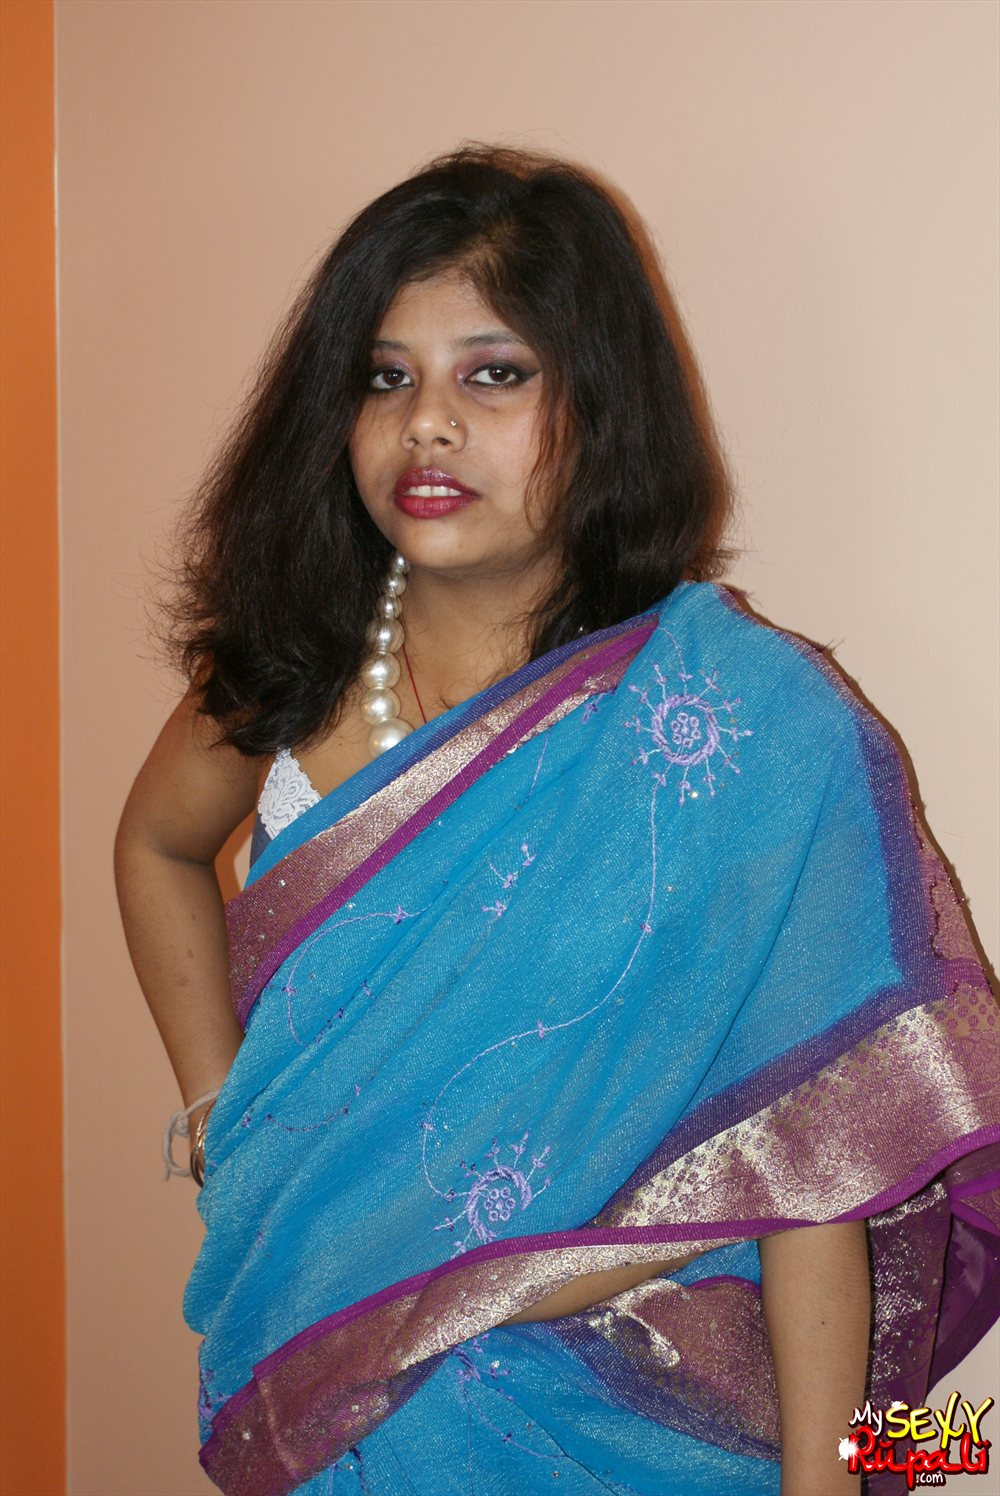 Pic gal  1. Rupali in indian saree stripping naked